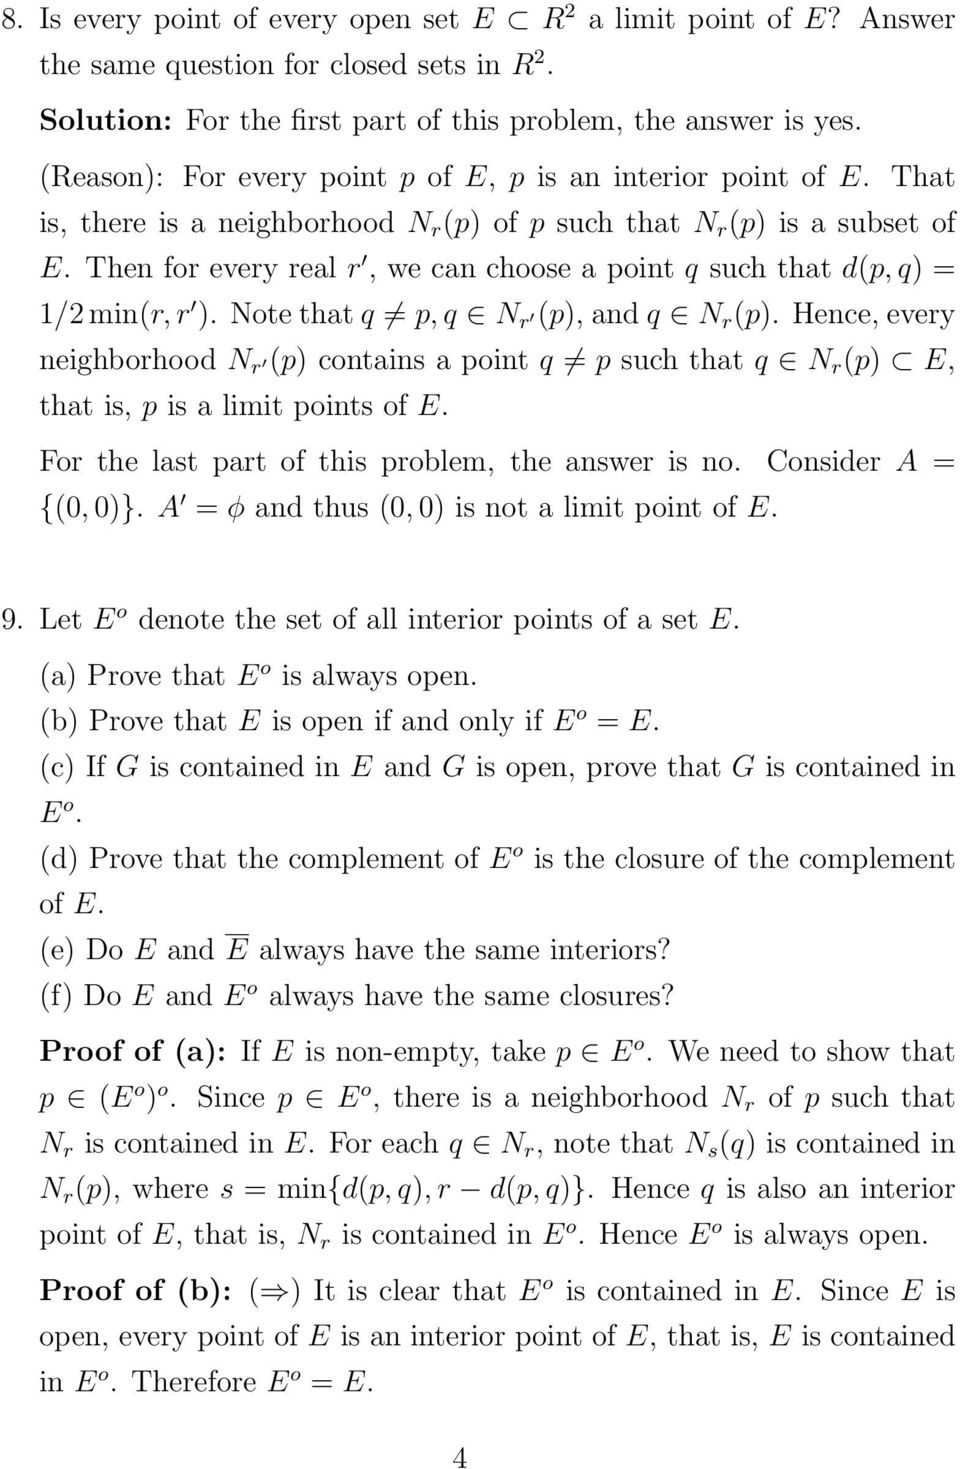 Then for every real r, we can choose a point q such that d(p, q) = 1/2 min(r, r ). Note that q p, q N r (p), and q N r (p).